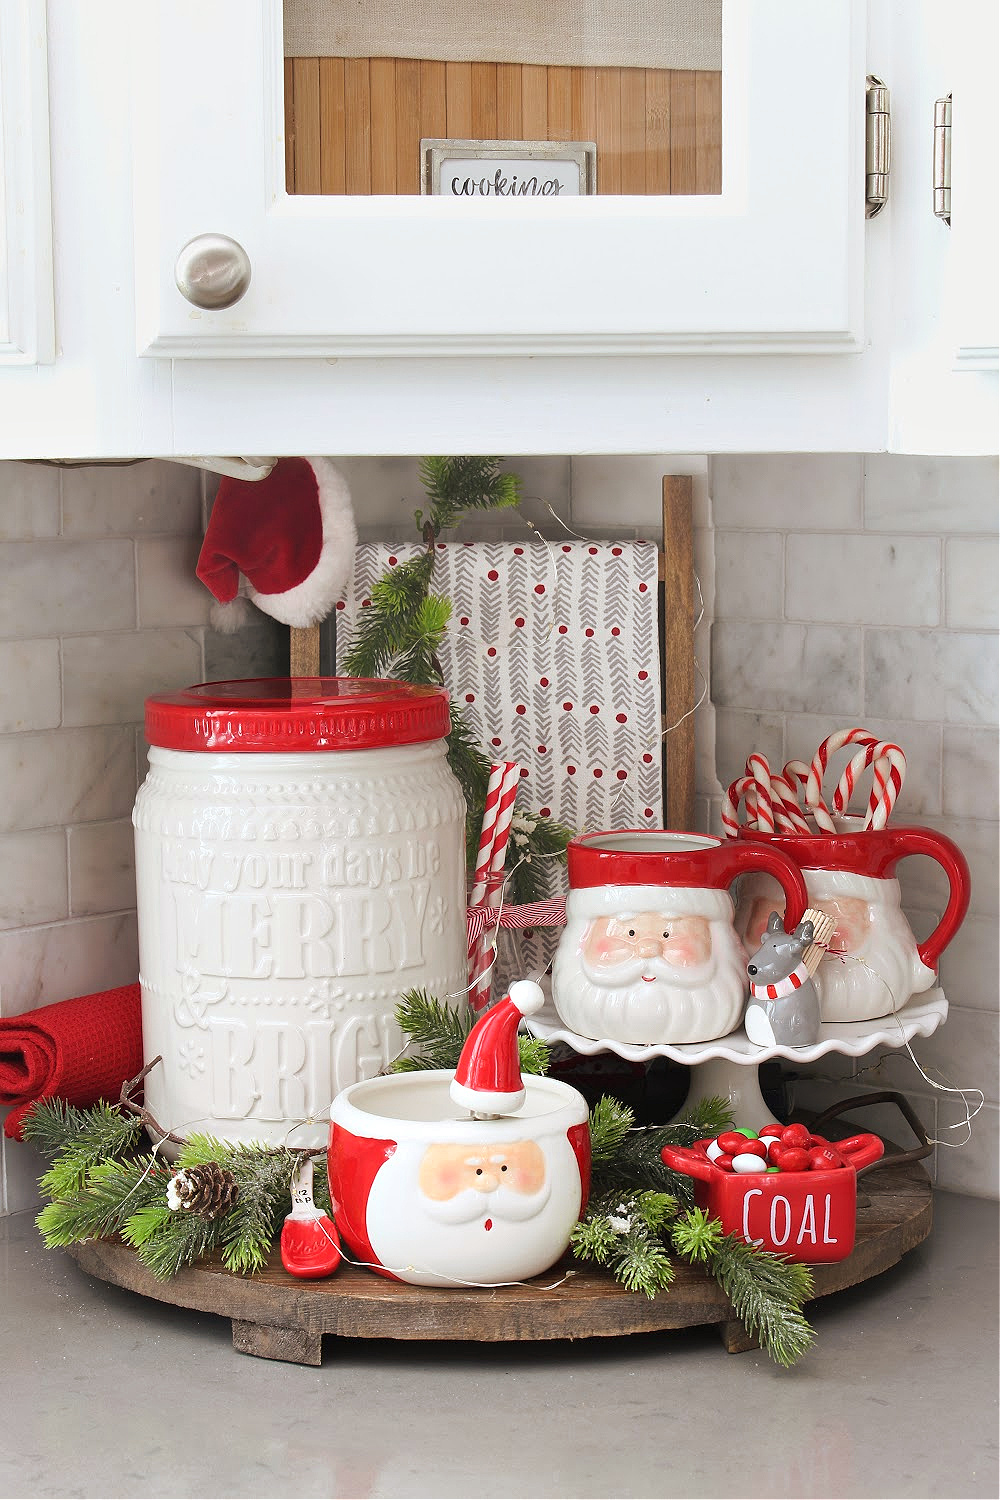 Red and white Christmas kitchen display with Santa mugs.